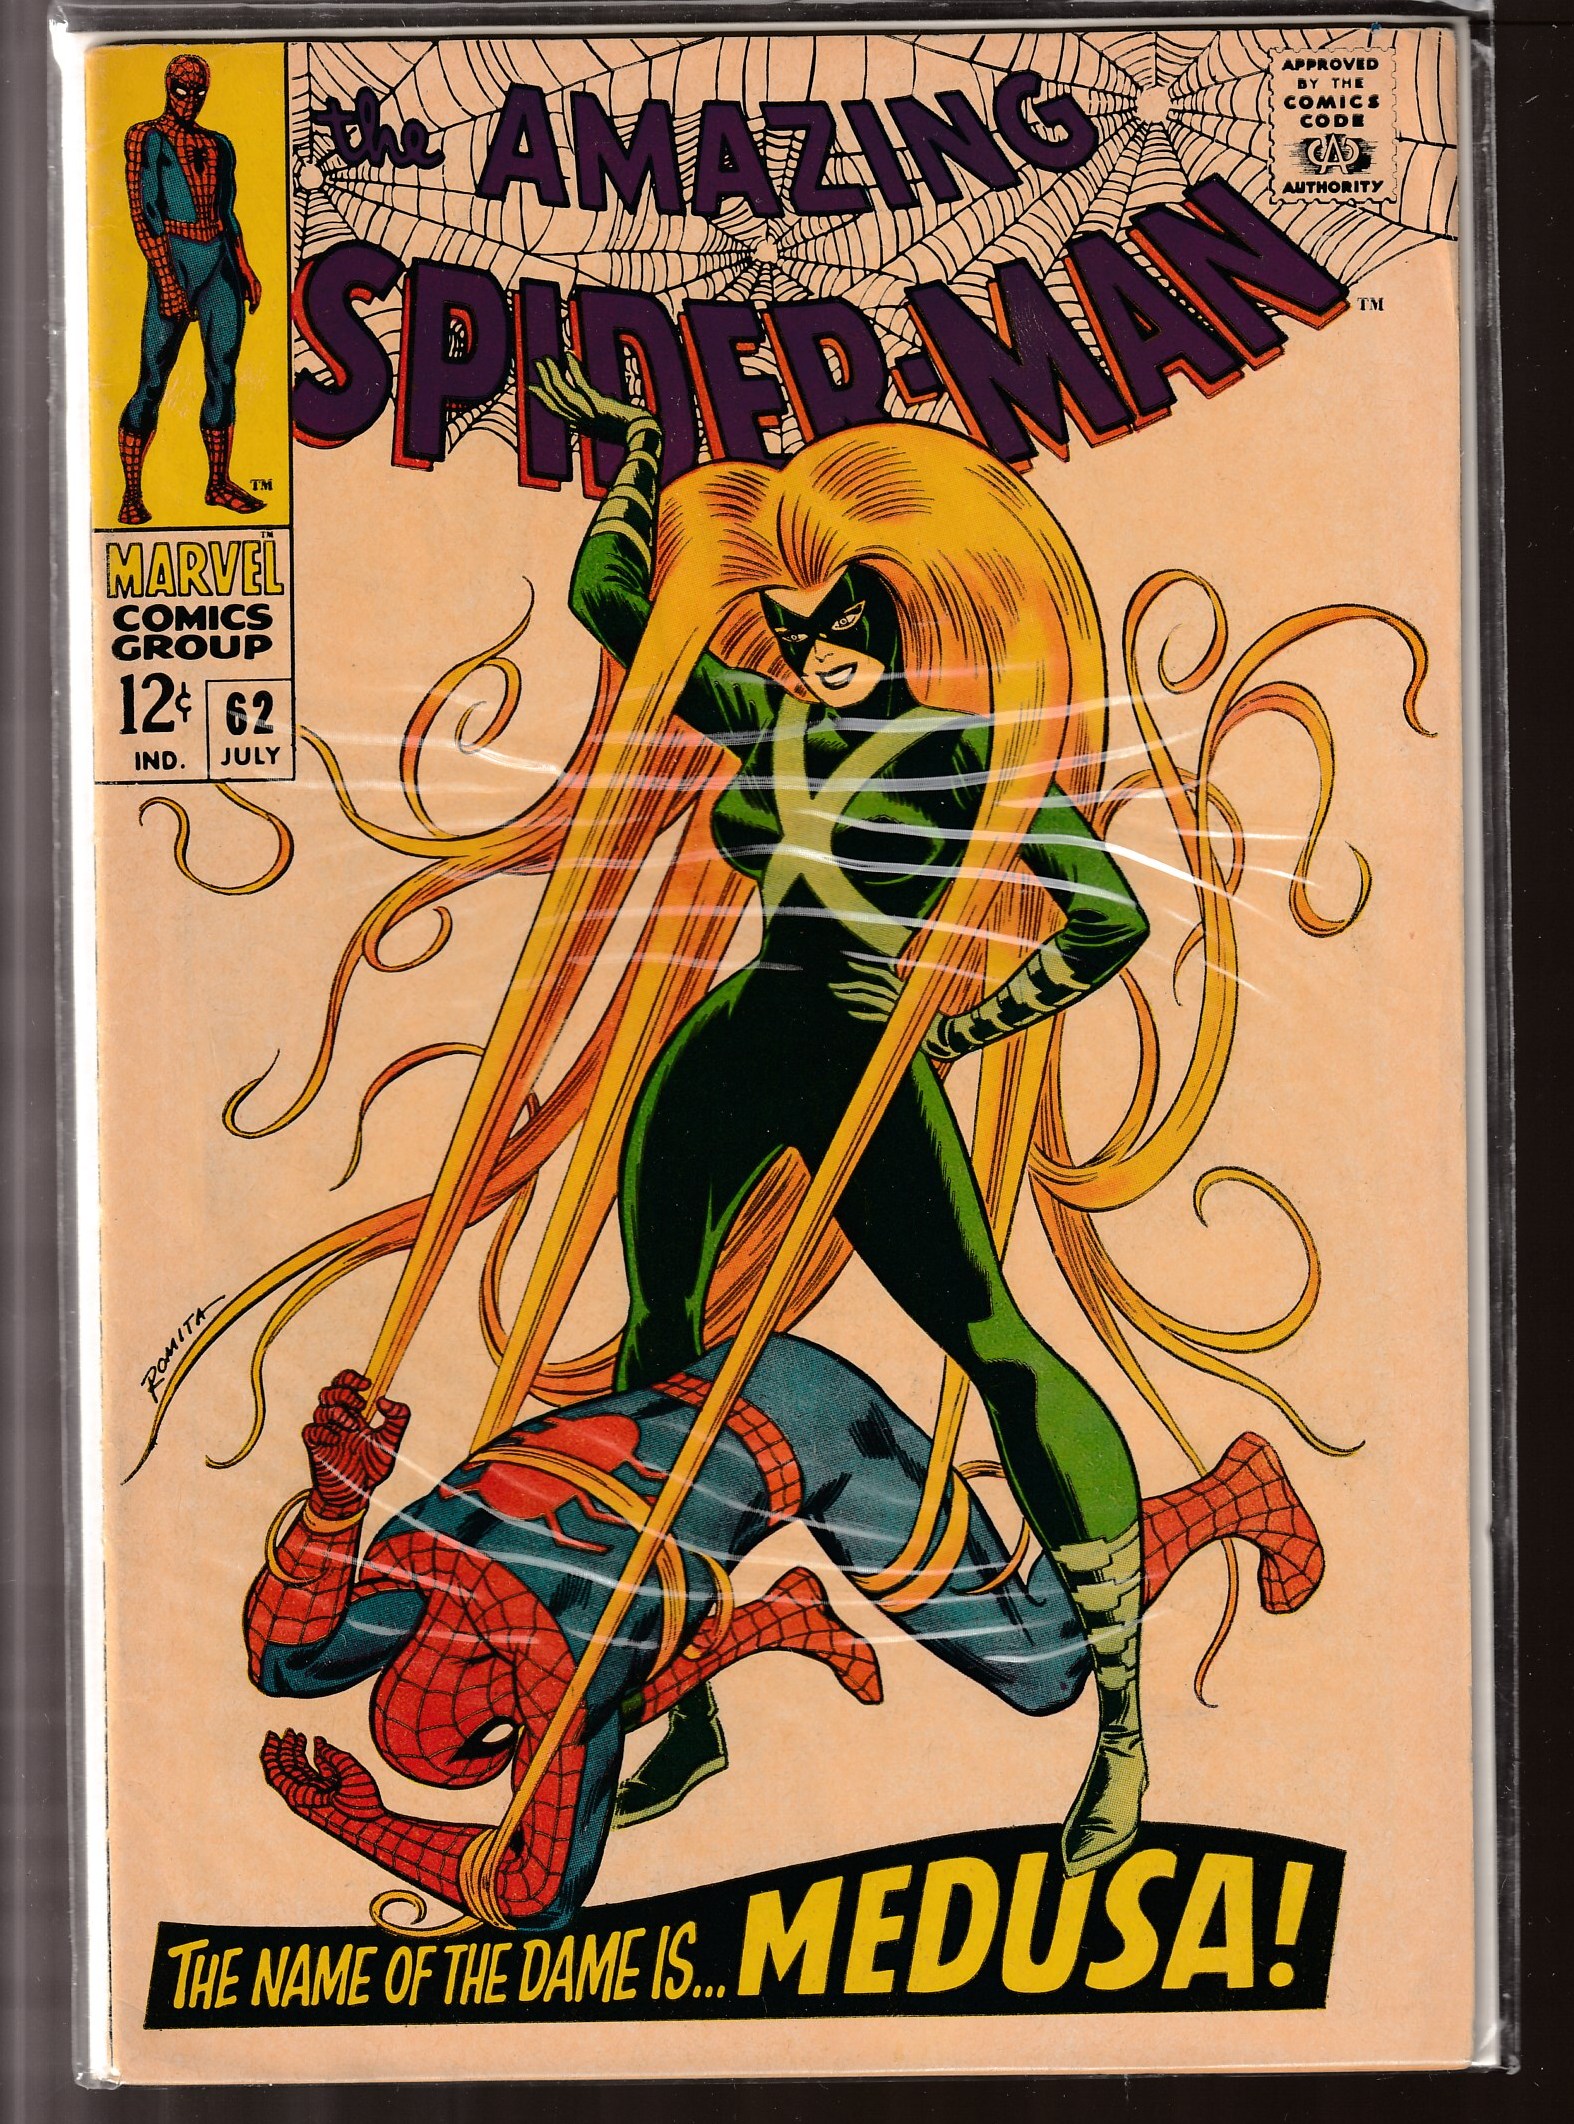  Comic: AMAZING SPIDER-MAN # 62 (1968) 'The Name of the Dame is MEDUSA!' Baseball cards value